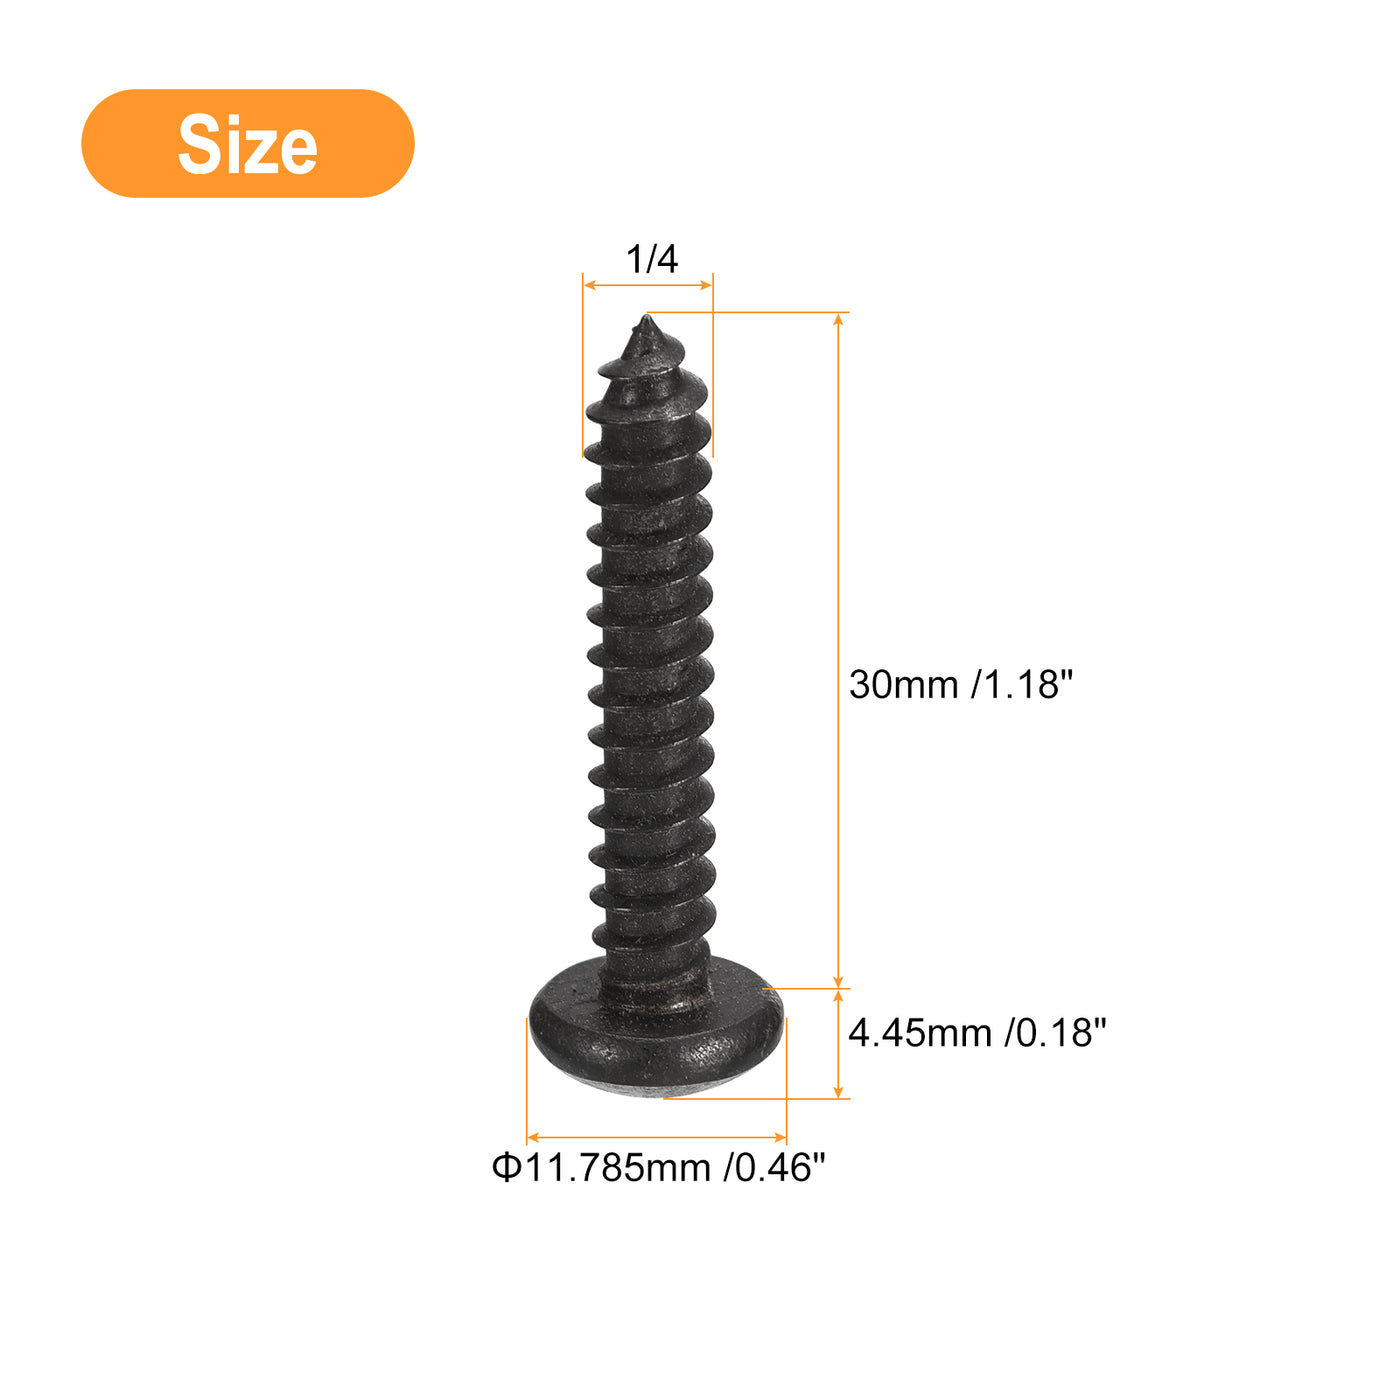 uxcell Uxcell 1/4 x 1-3/16" Phillips Pan Head Self-tapping Screw, 25pcs - 304 Stainless Steel Round Head Wood Screw Full Thread (Black)